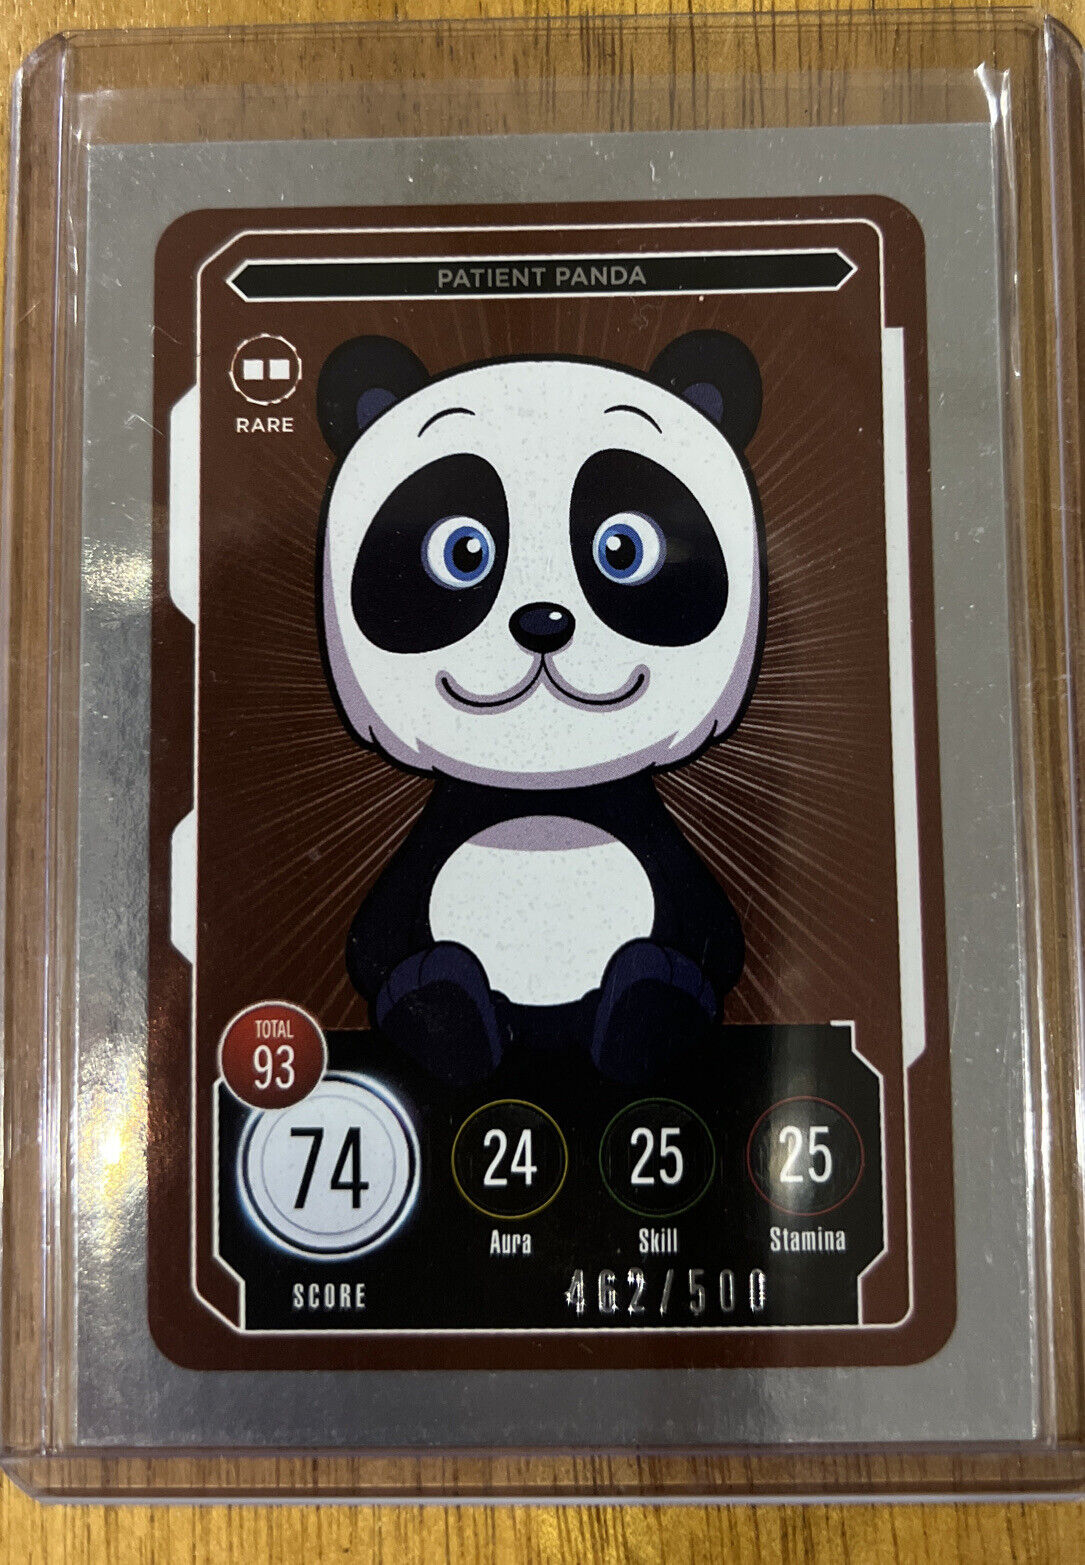 Patient Panda Rare 462/500 Veefriends Series 2 Trading Card Fresh Pull Collect